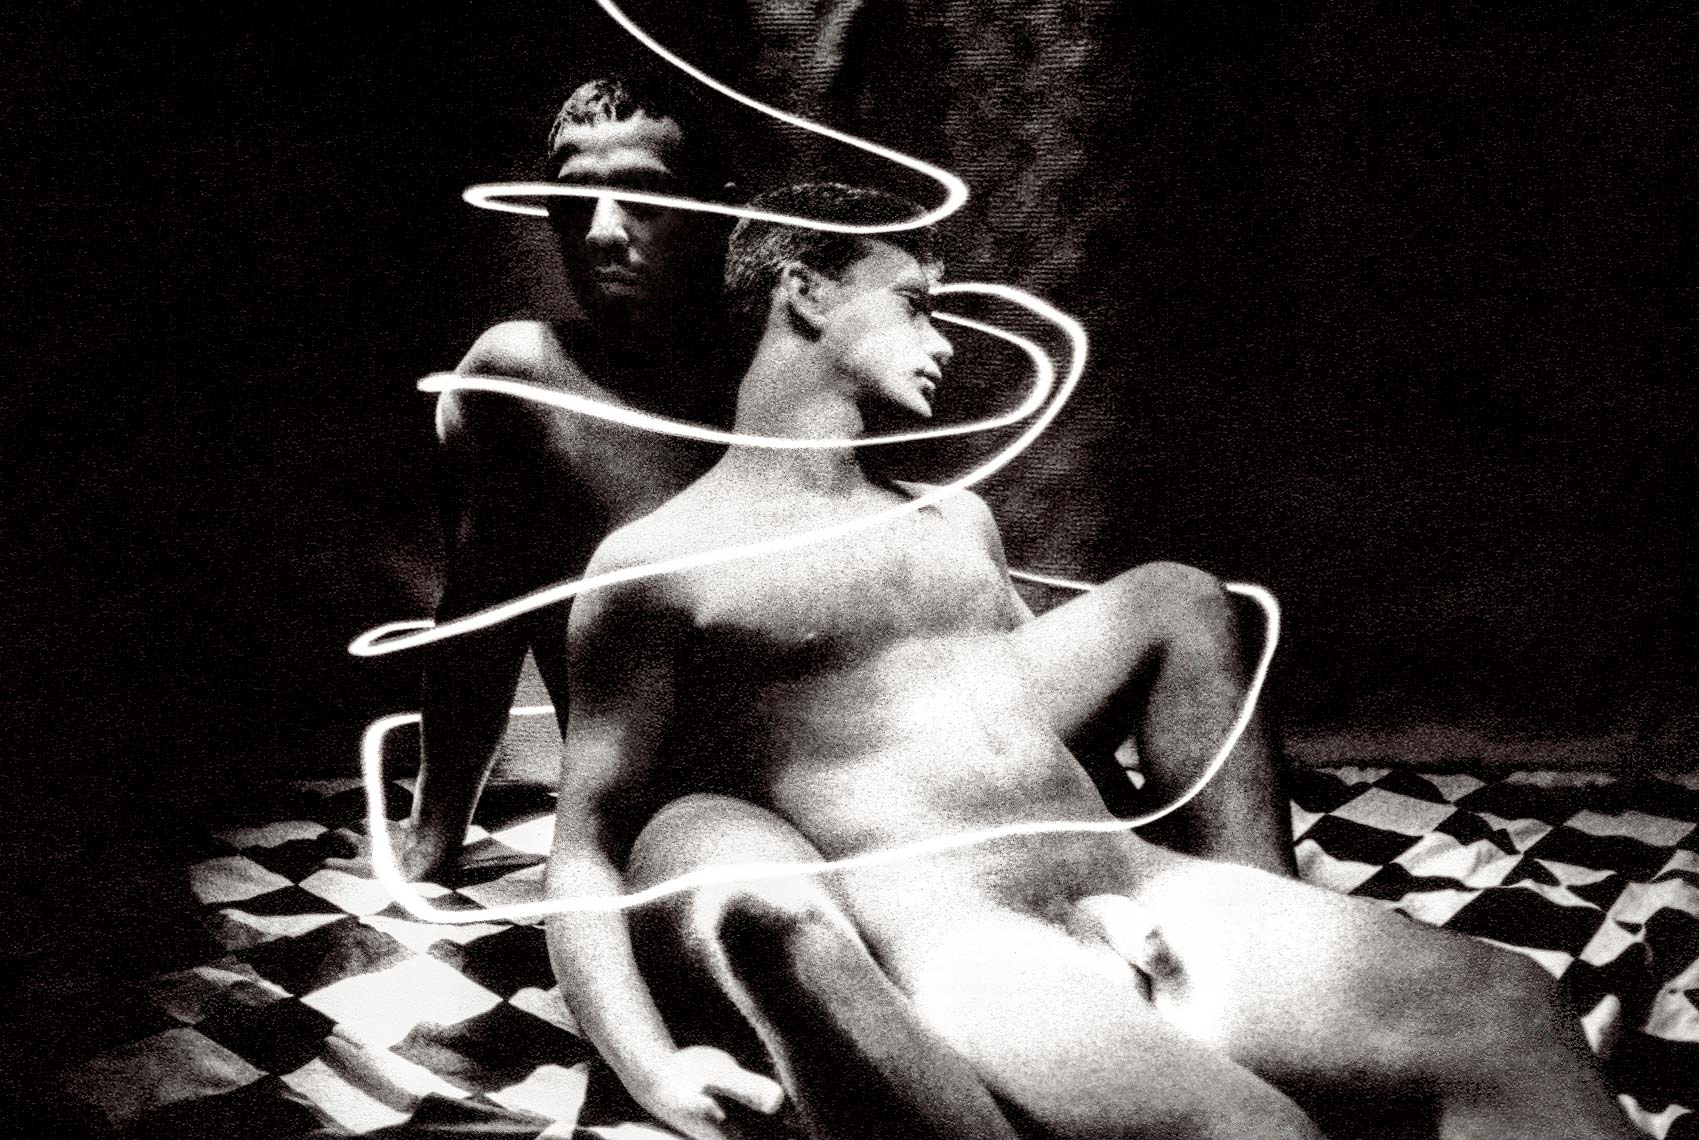 Spiral-87-v2-male nude, light drawing, black and white photograph